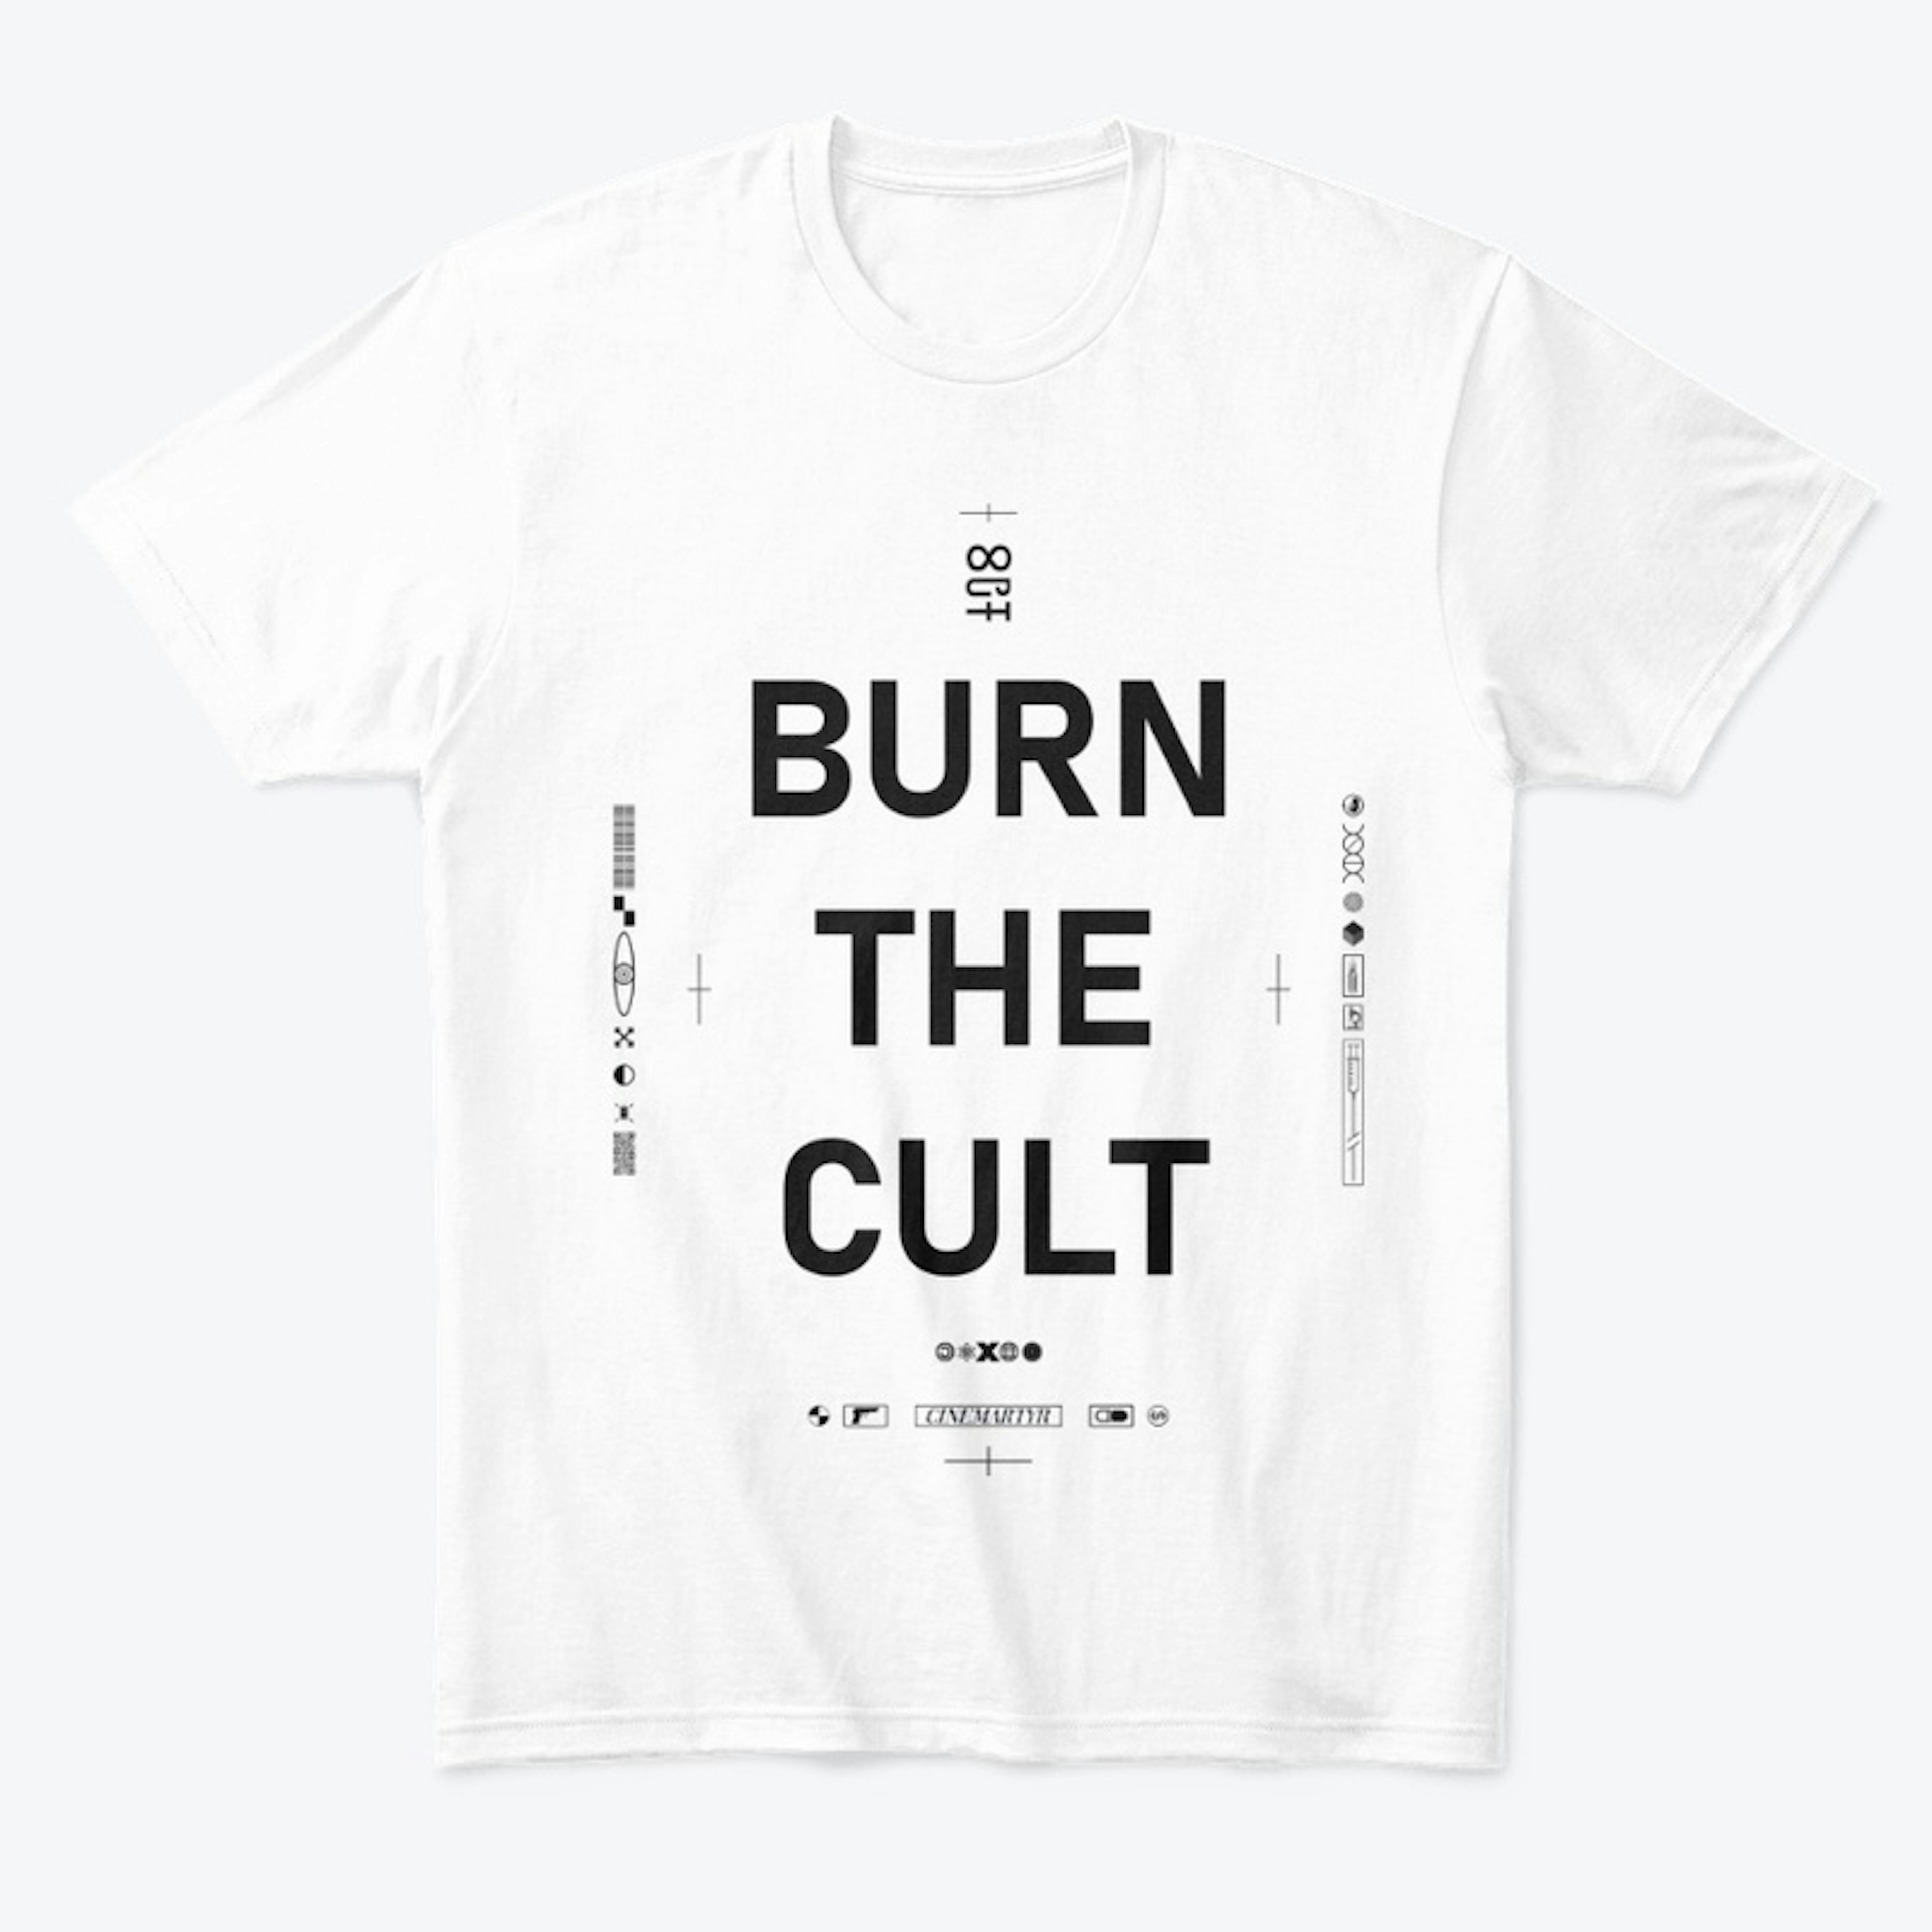 BURN THE CULT (White & Red)